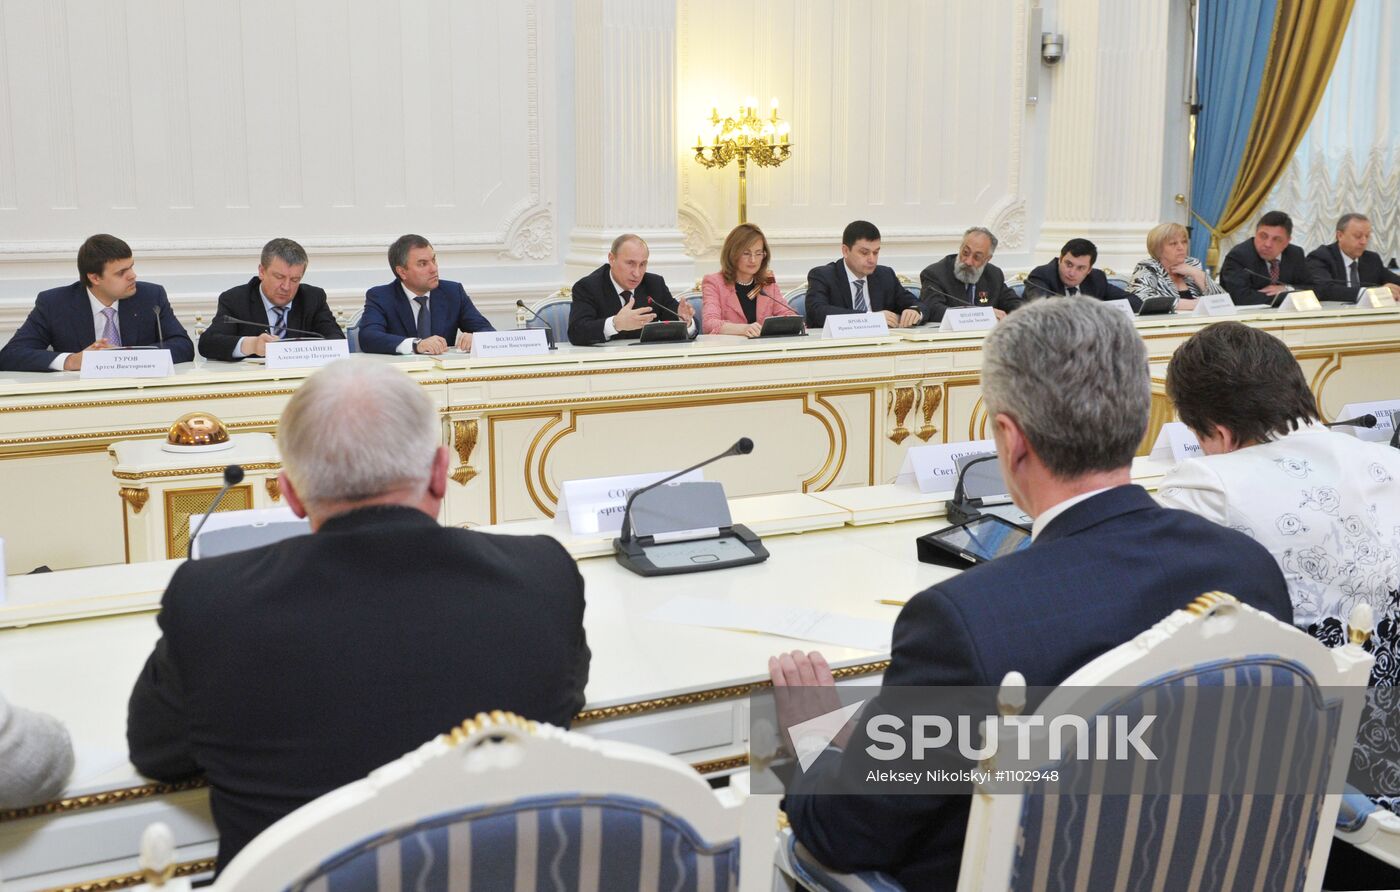 Vladimir Putin meets with United Russia Party leadership